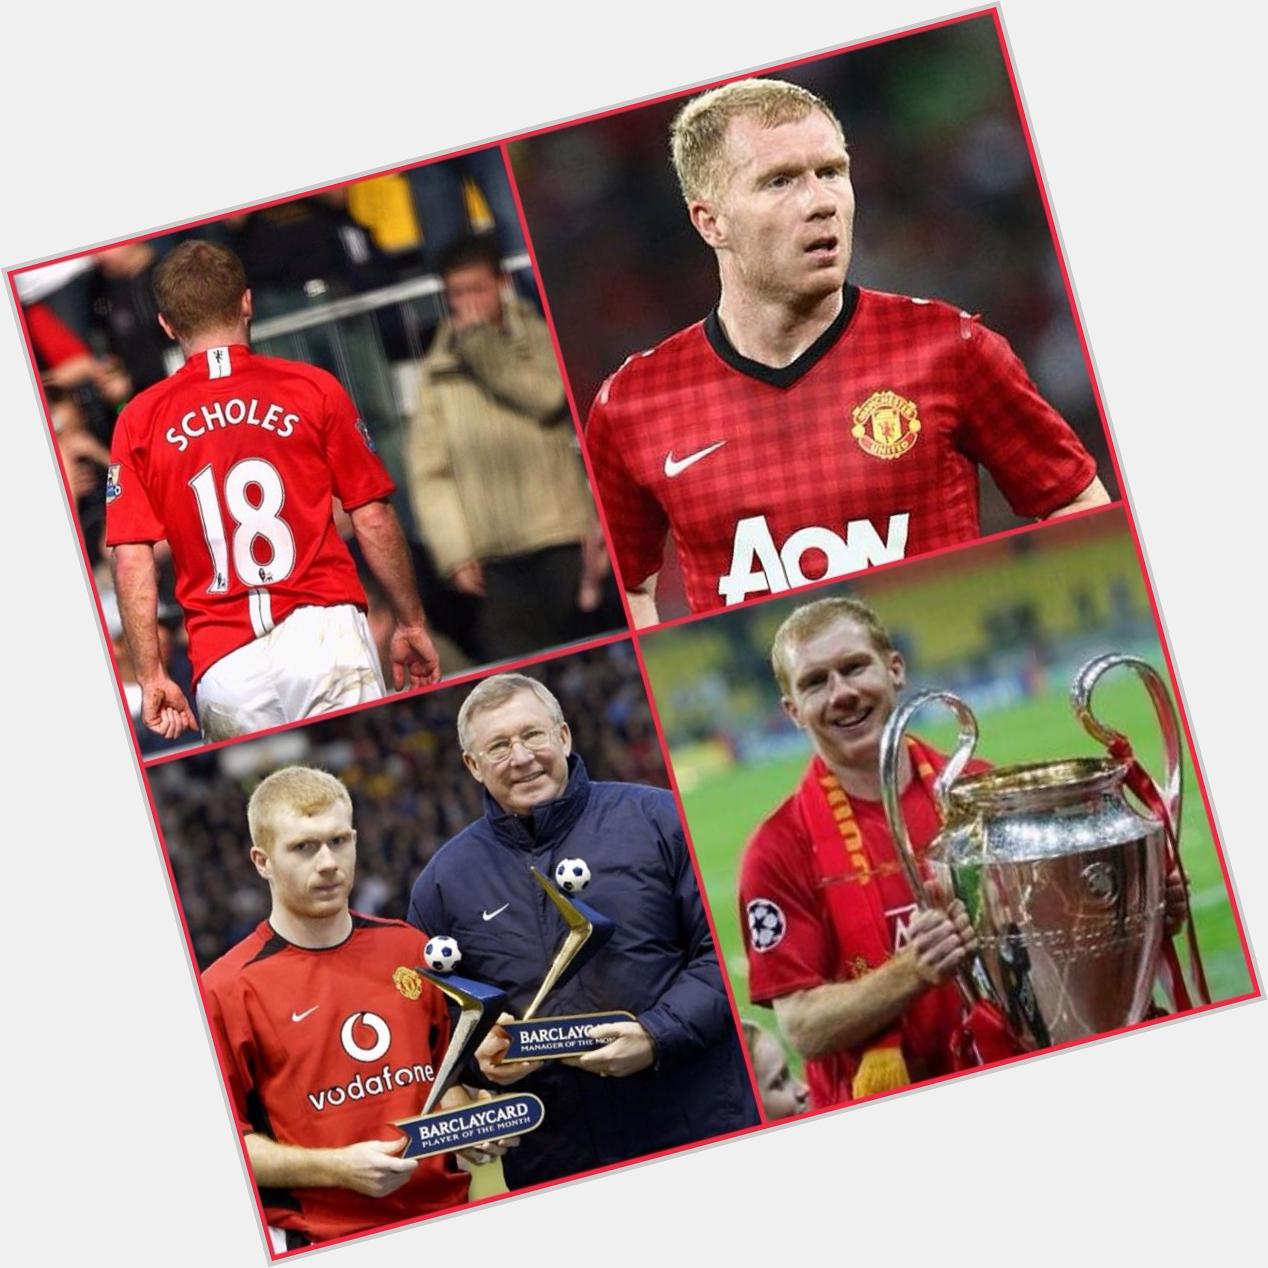 Wishing a very happy 40th birthday to legend Paul Scholes       